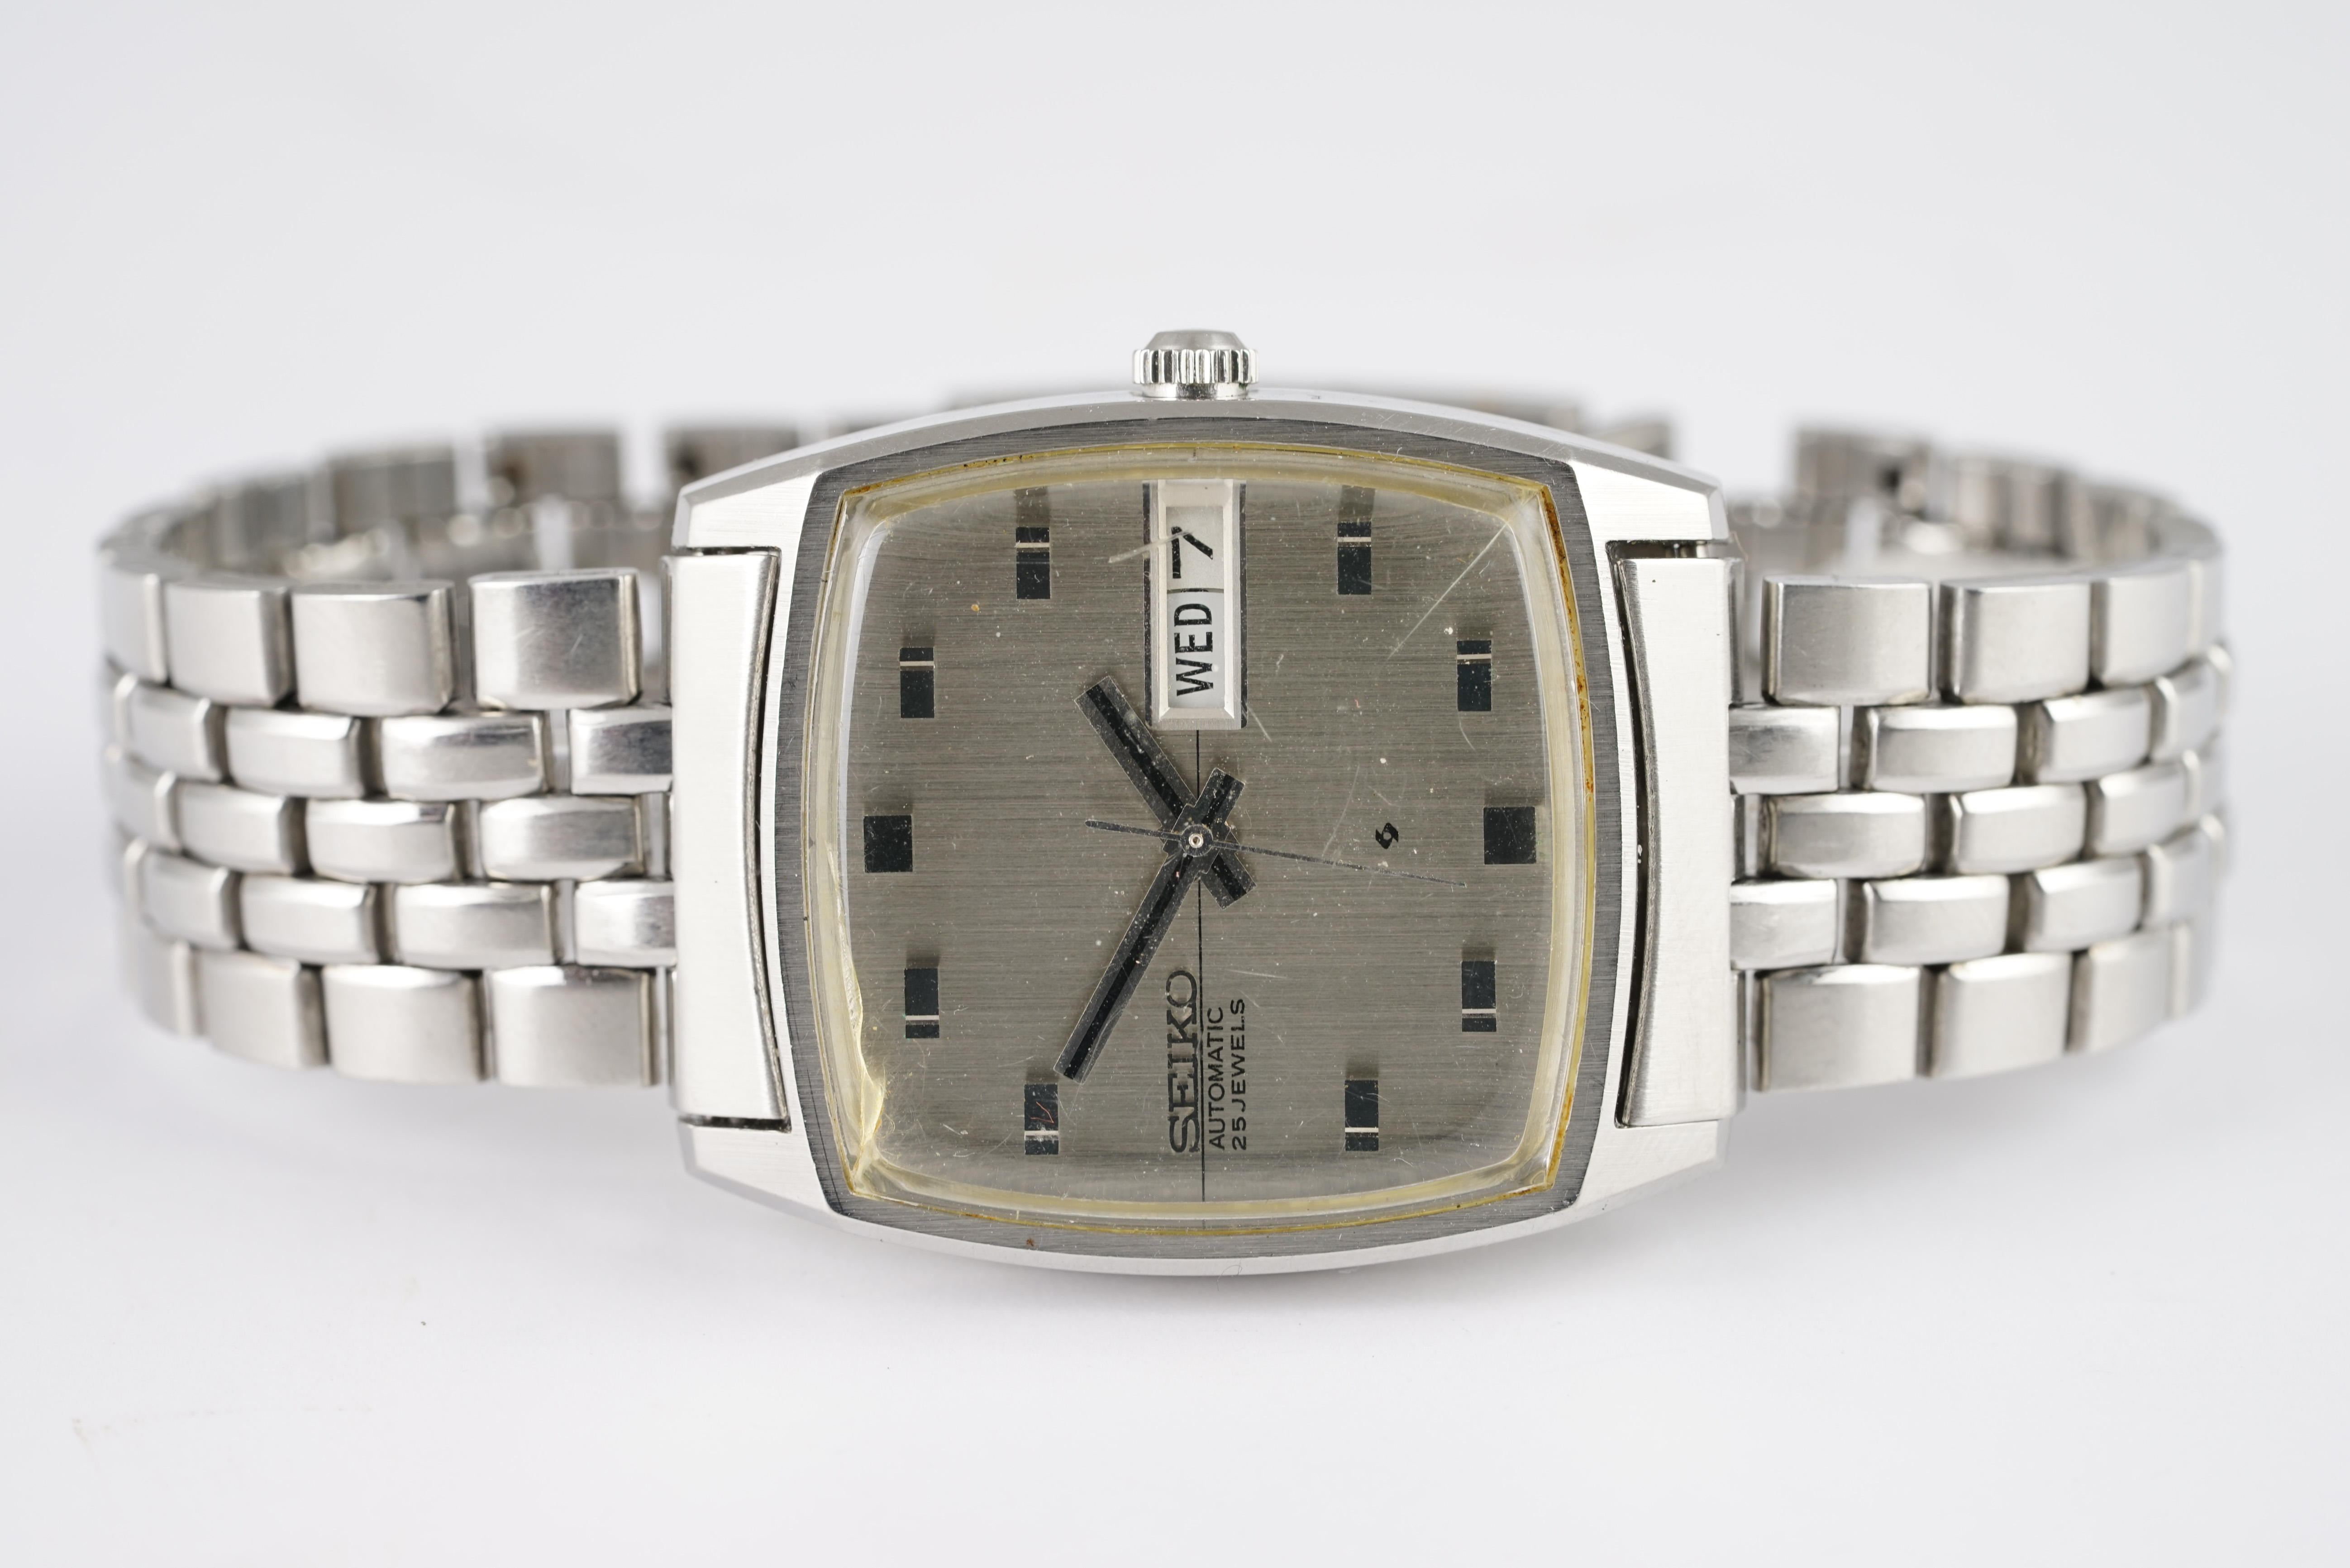 GENTLEMENS SEIKO LORD MATIC DAY DATE WRISTWATCH REF. 5606-5000, square grey dial with block hour